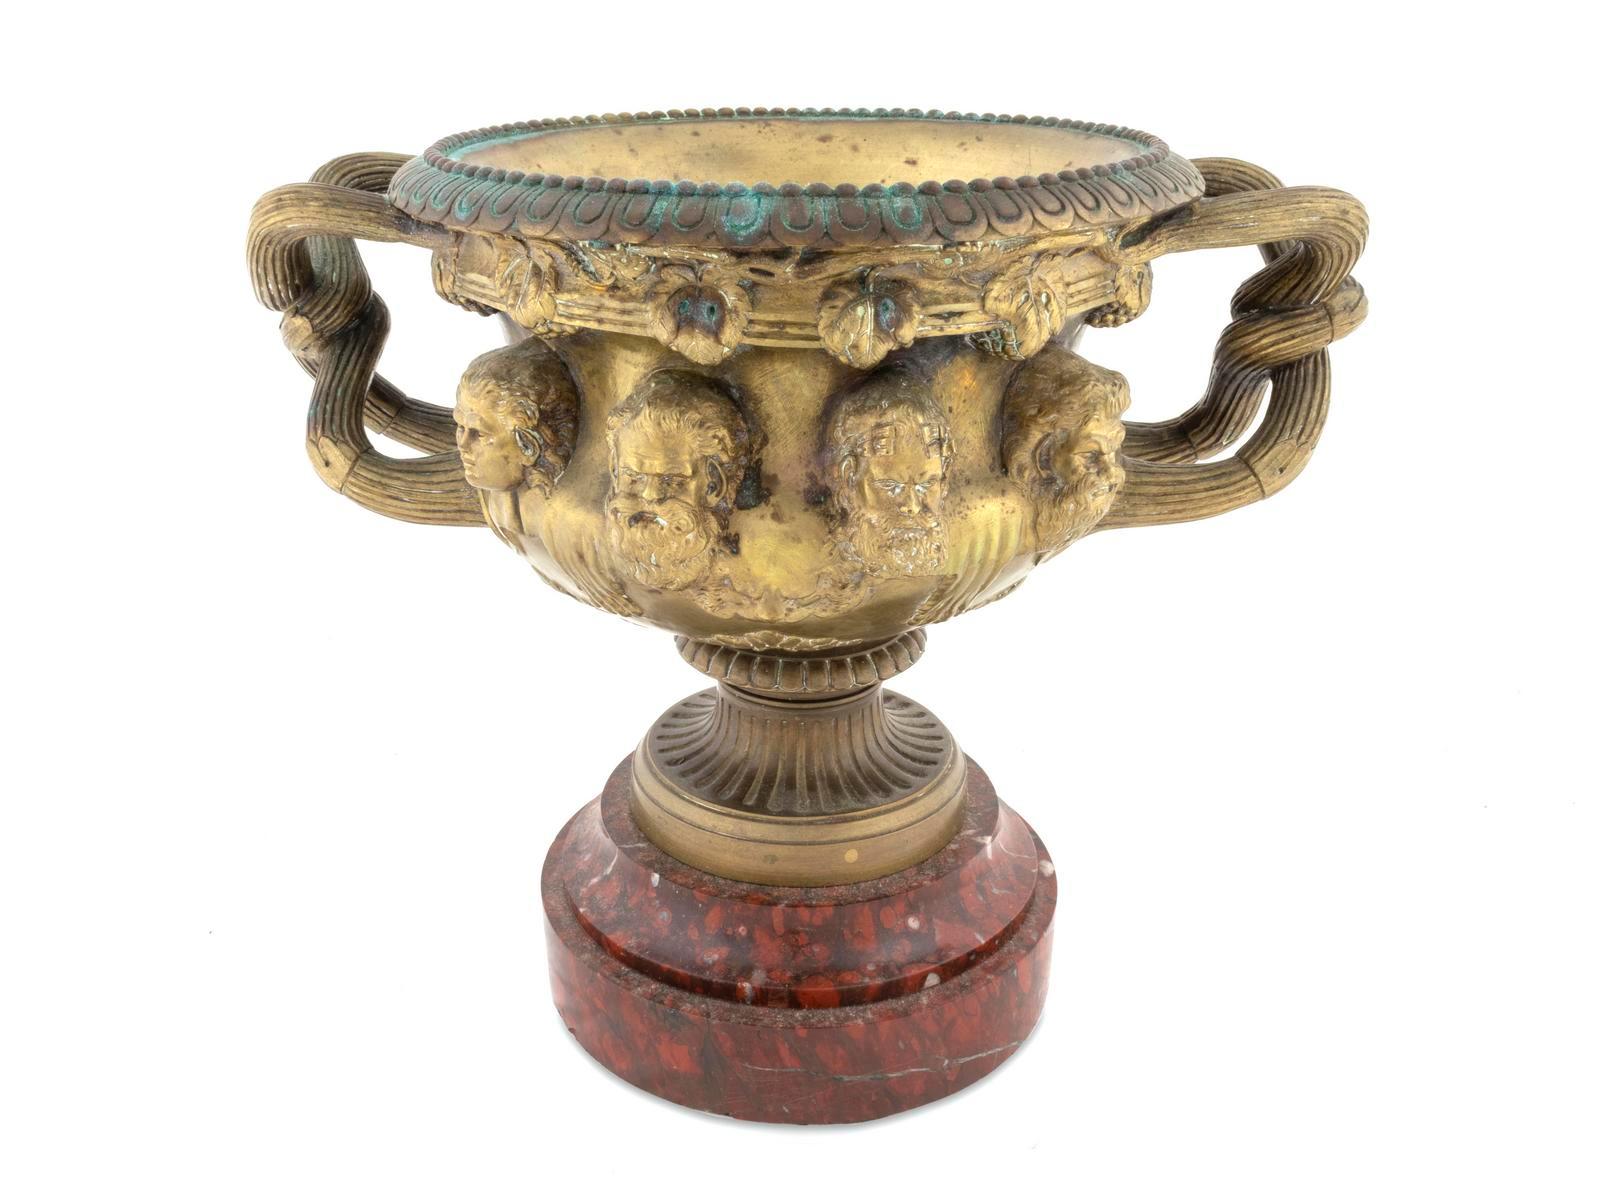 A French gilt-bronze two-handled Warwick vase
After Clodion. With egg and dart rim, the vessel cast in relief with cherub heads and entwined branch-form handles, raised on a Rouge Griotte marble circular base, circa 1880
Measures: Height 11 1/2 x